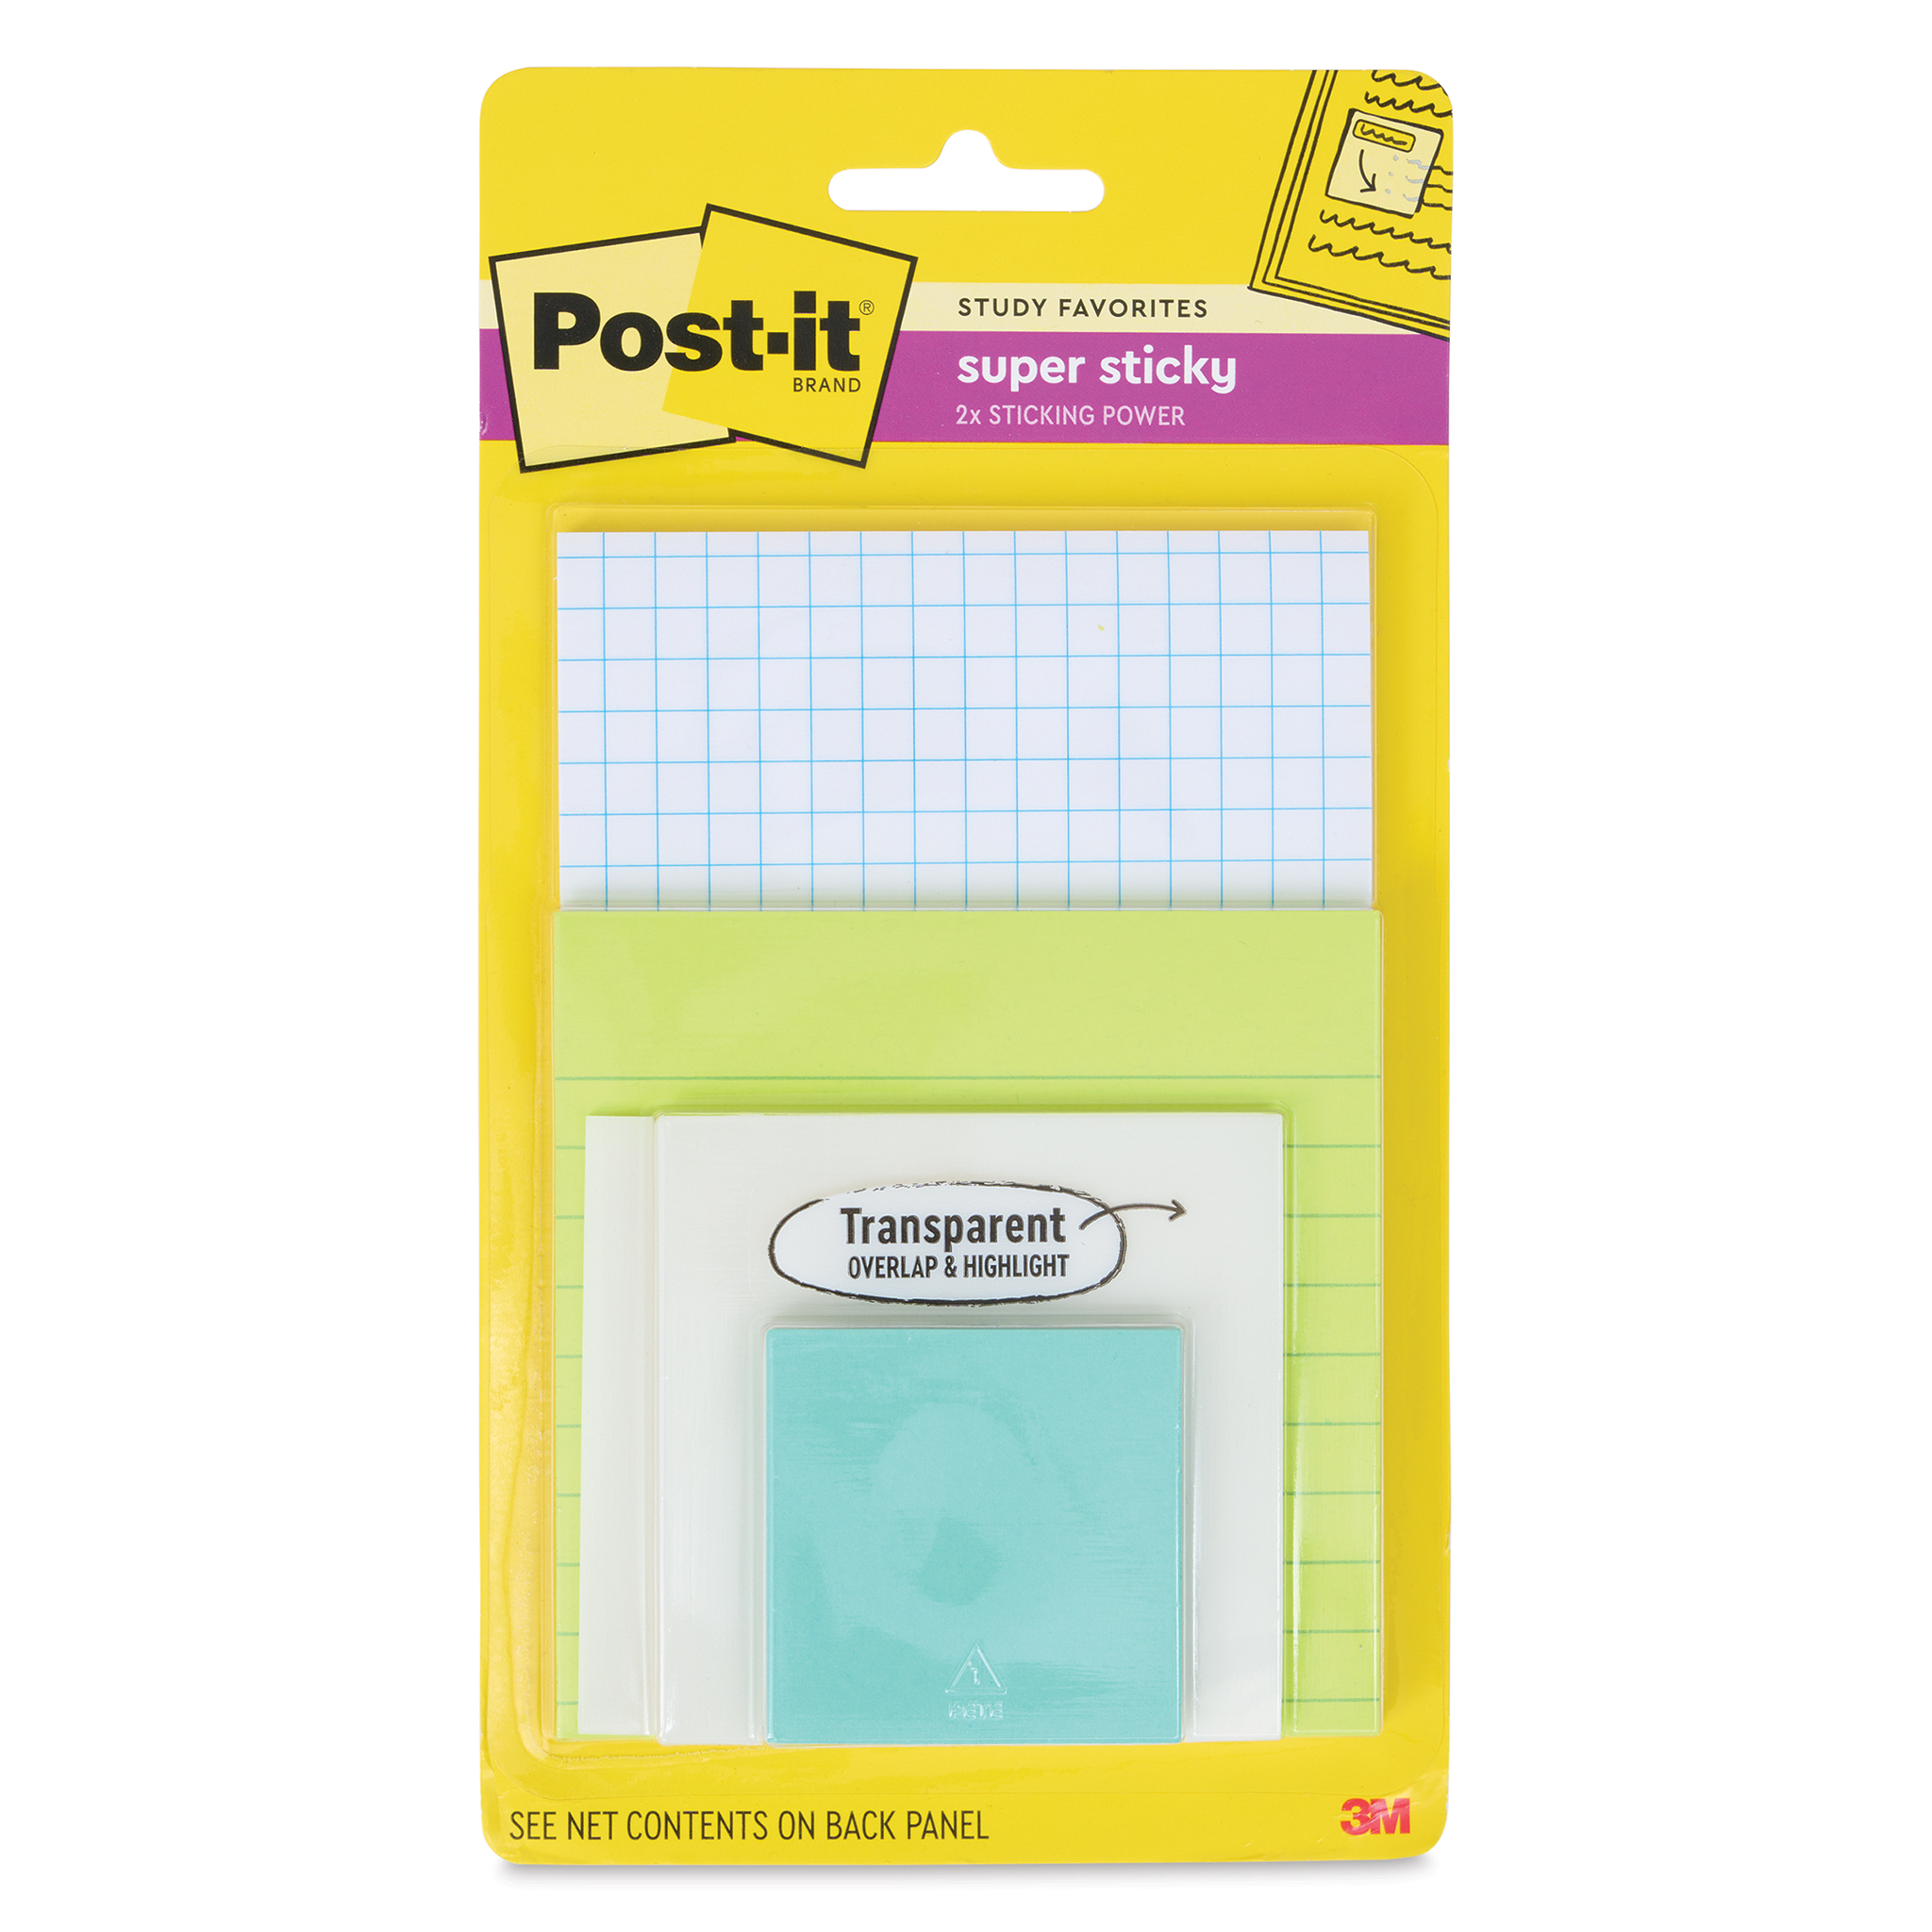 Post-It Super Sticky Notes Study Pack